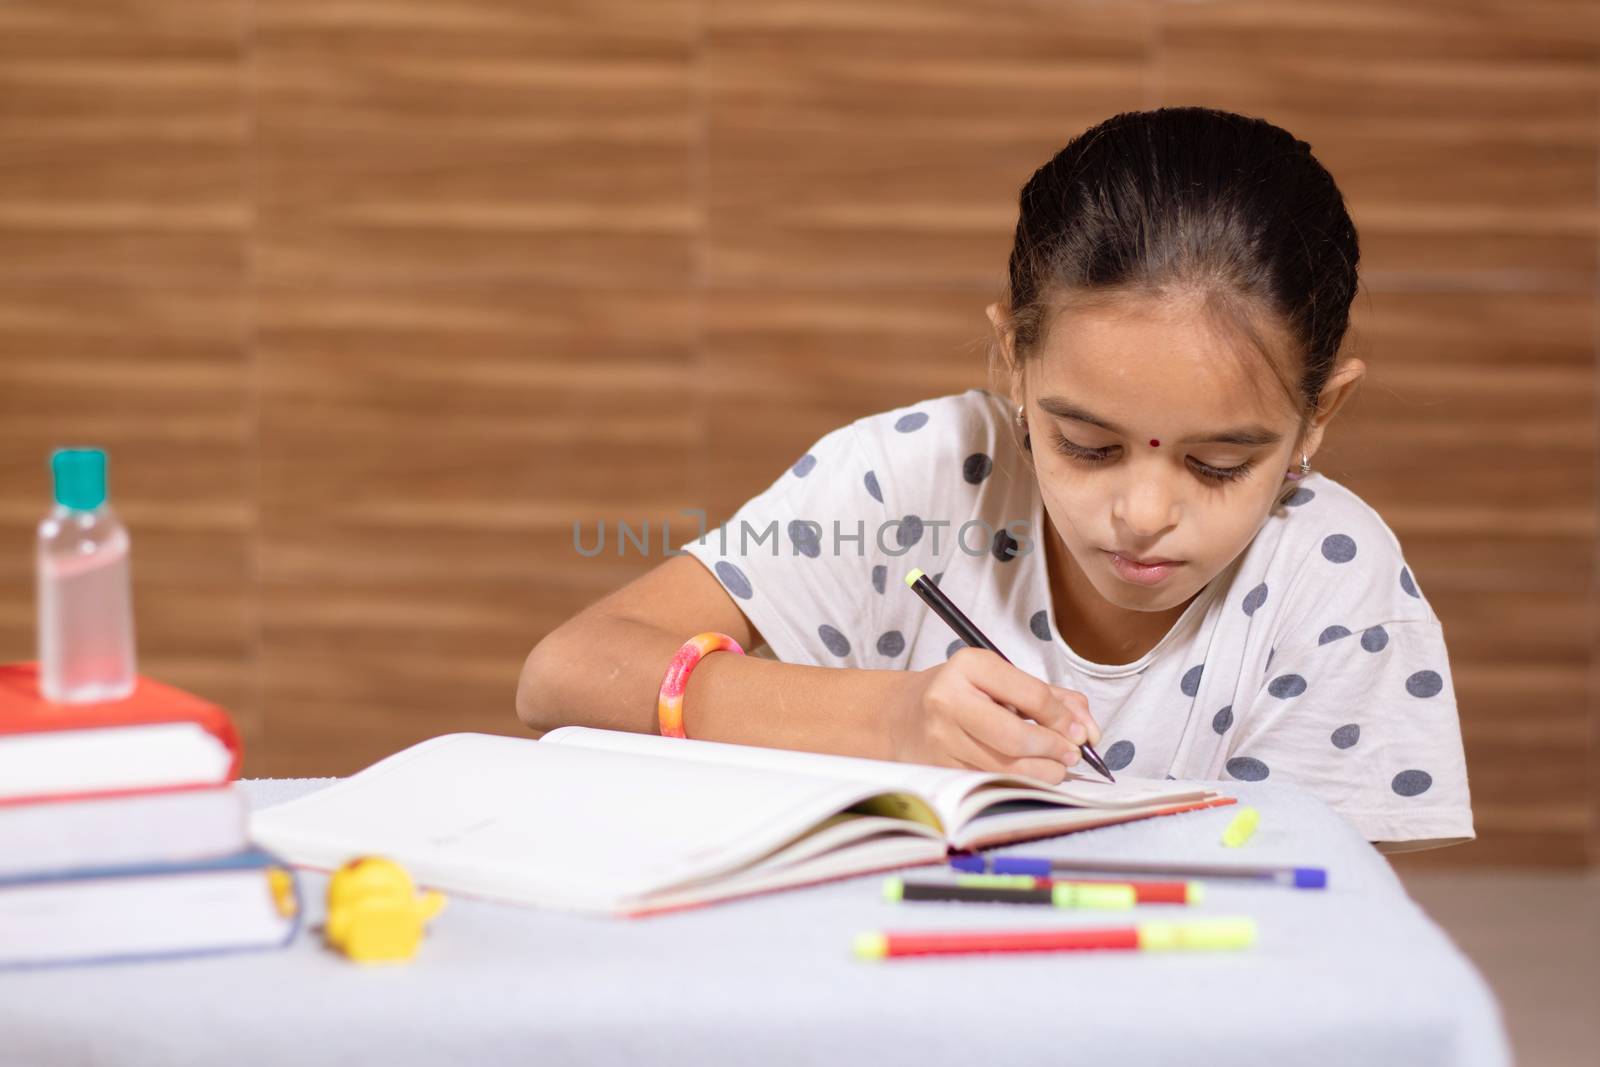 Little schoolgirl busy in doing homework with hand sanitizer in front during coronavirus or covid-19 outbreak - Concept of homeschooling, children education by lakshmiprasad.maski@gmai.com